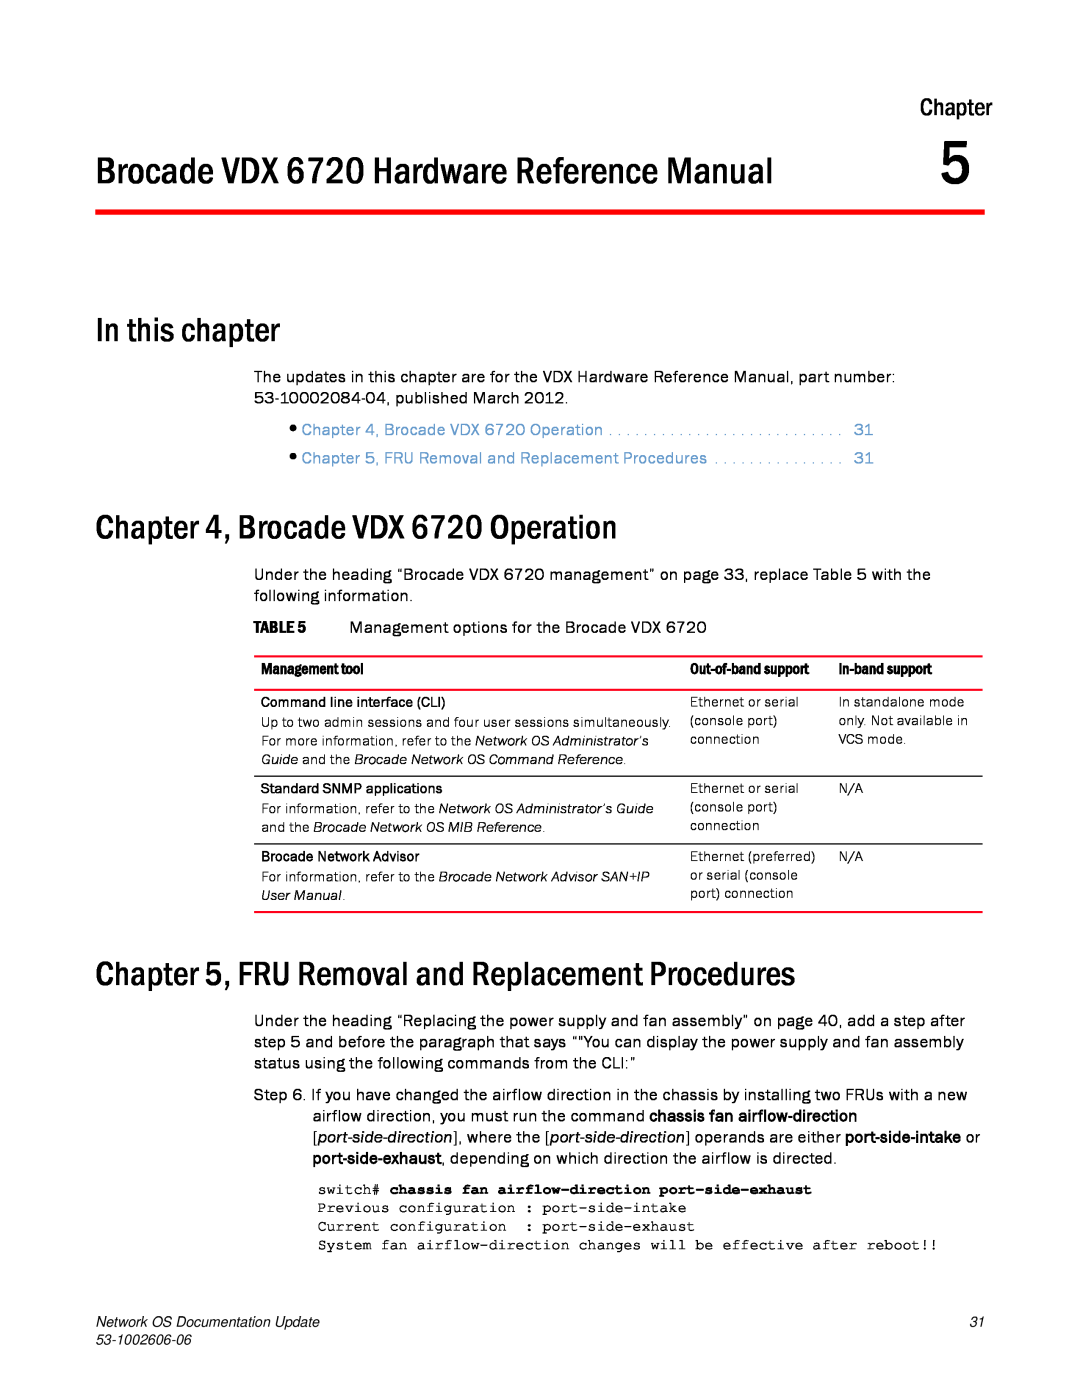 Brocade Communications Systems 2.1 Brocade VDX 6720 Hardware Reference Manual, Brocade VDX 6720 Operation, In this chapter 